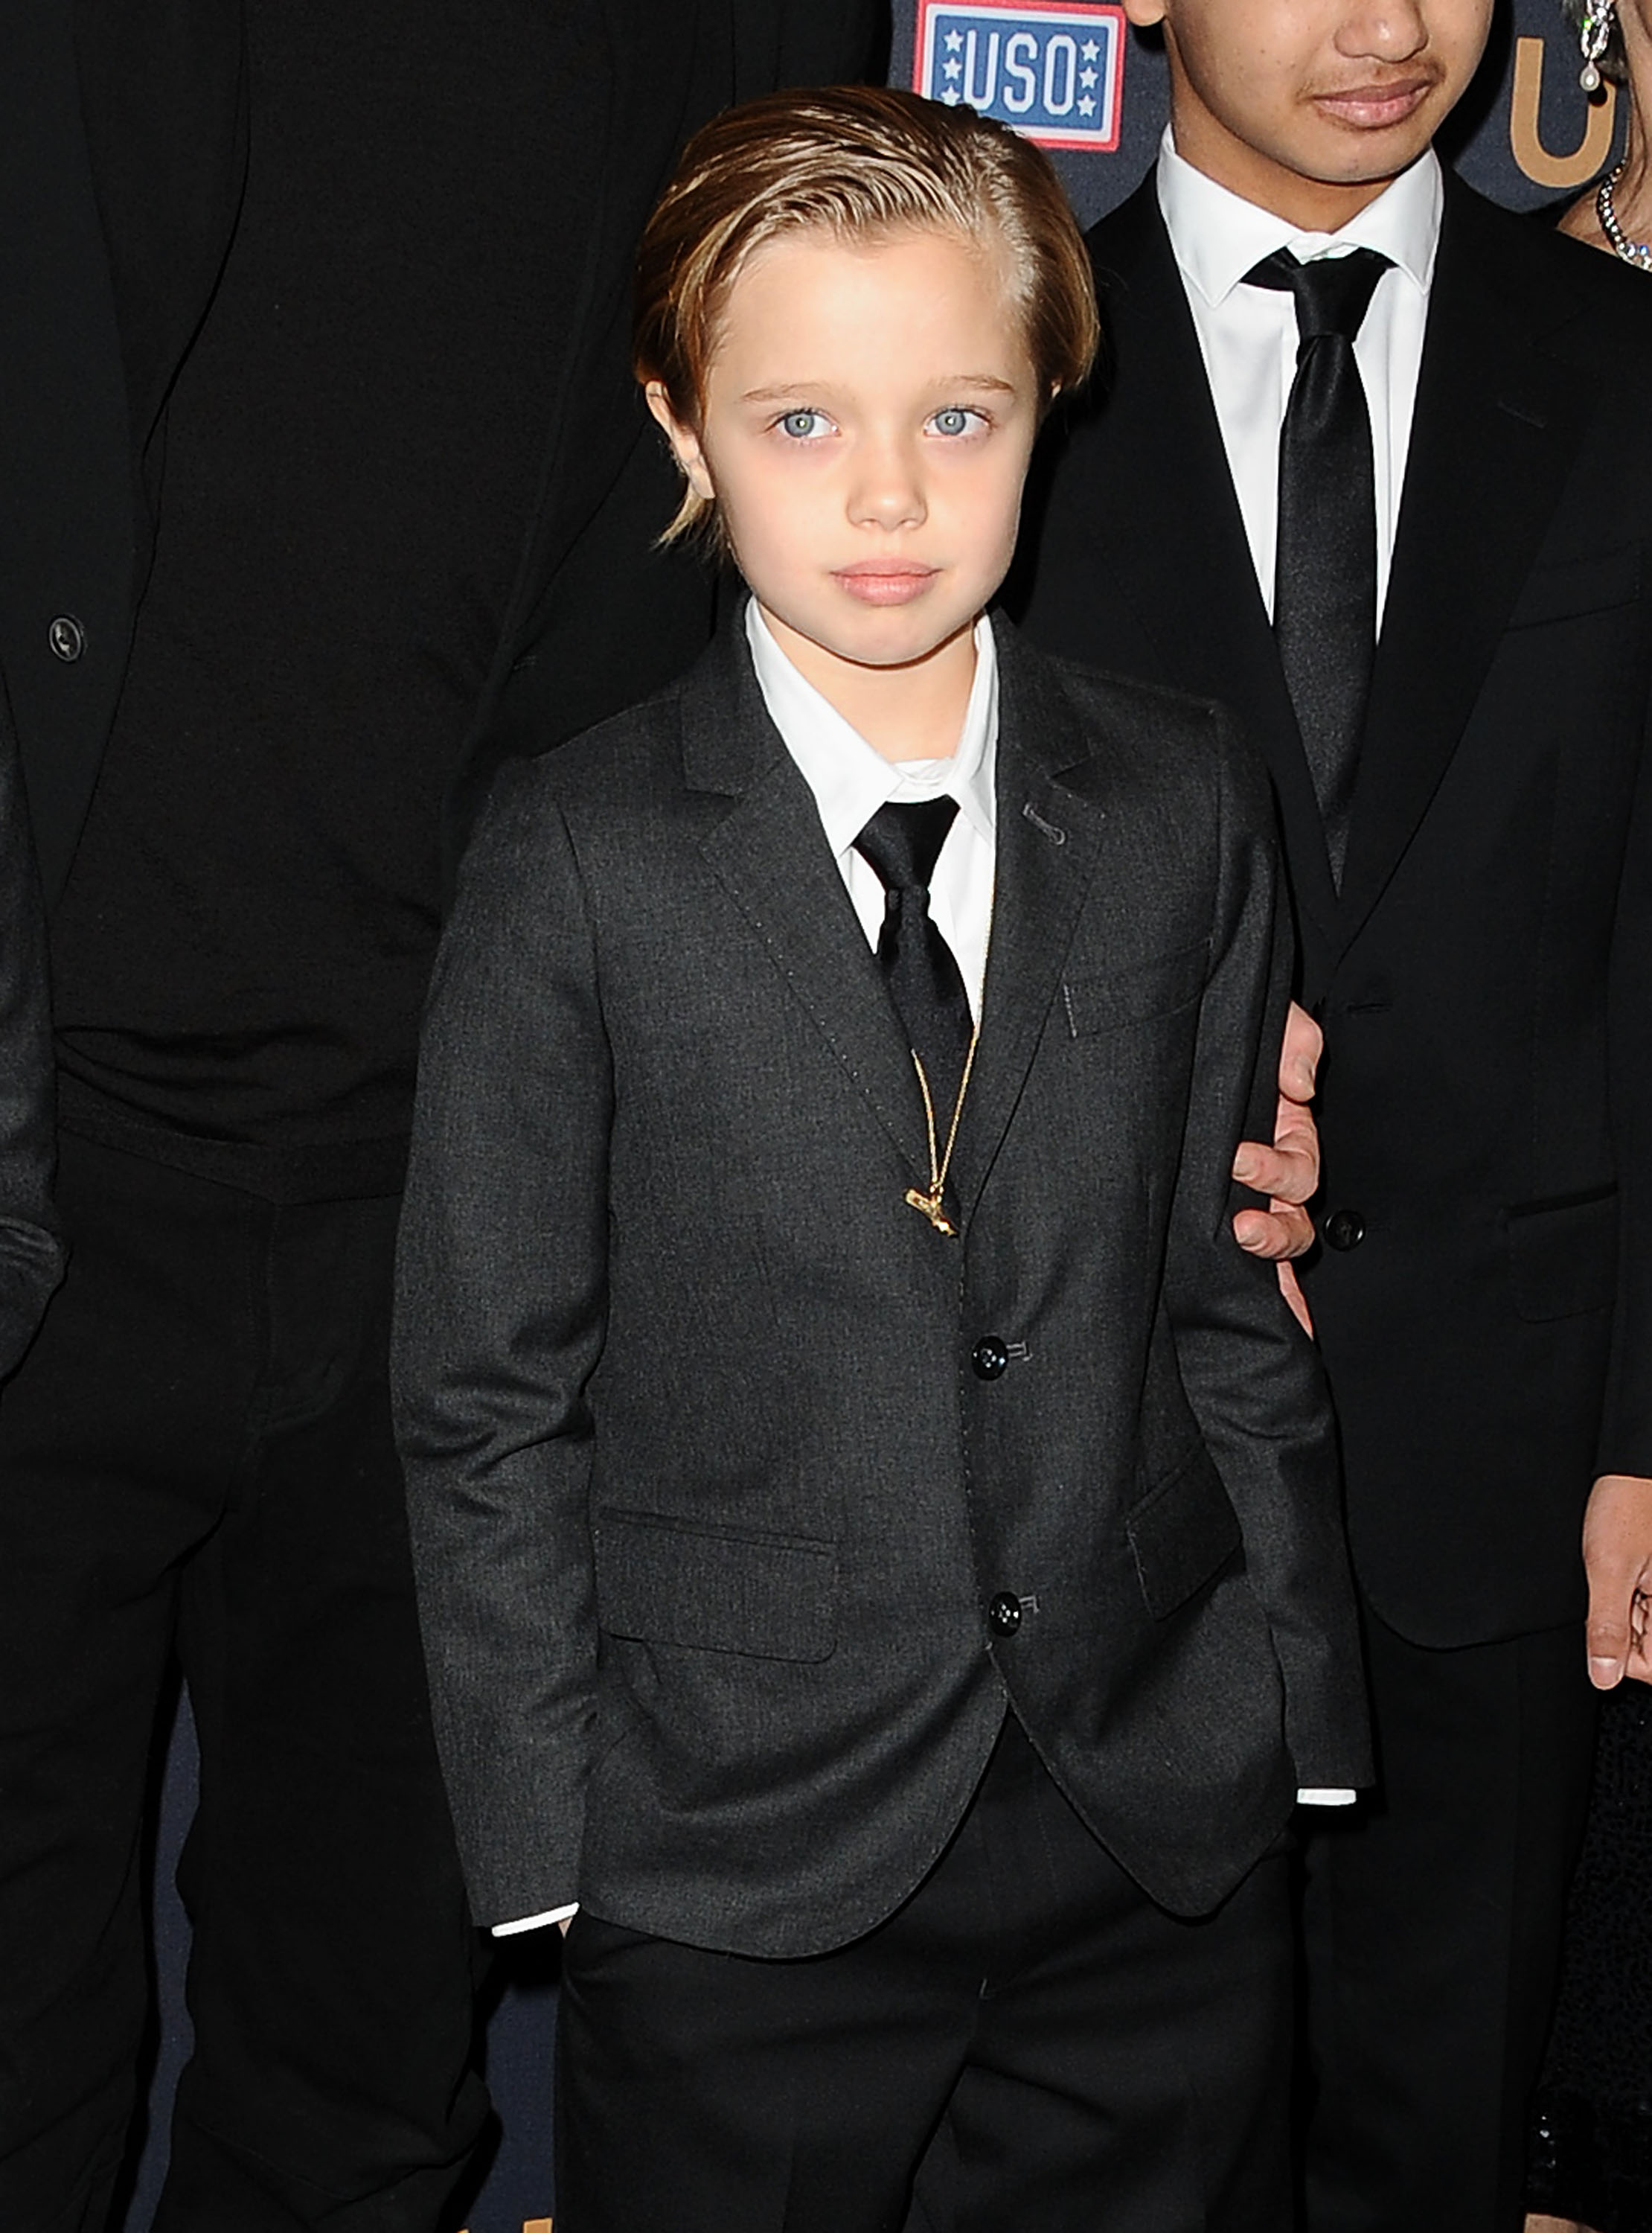 Shiloh Jolie-Pitt at the "Unbroken" premiere in LA in 2014 | Source: Getty Images